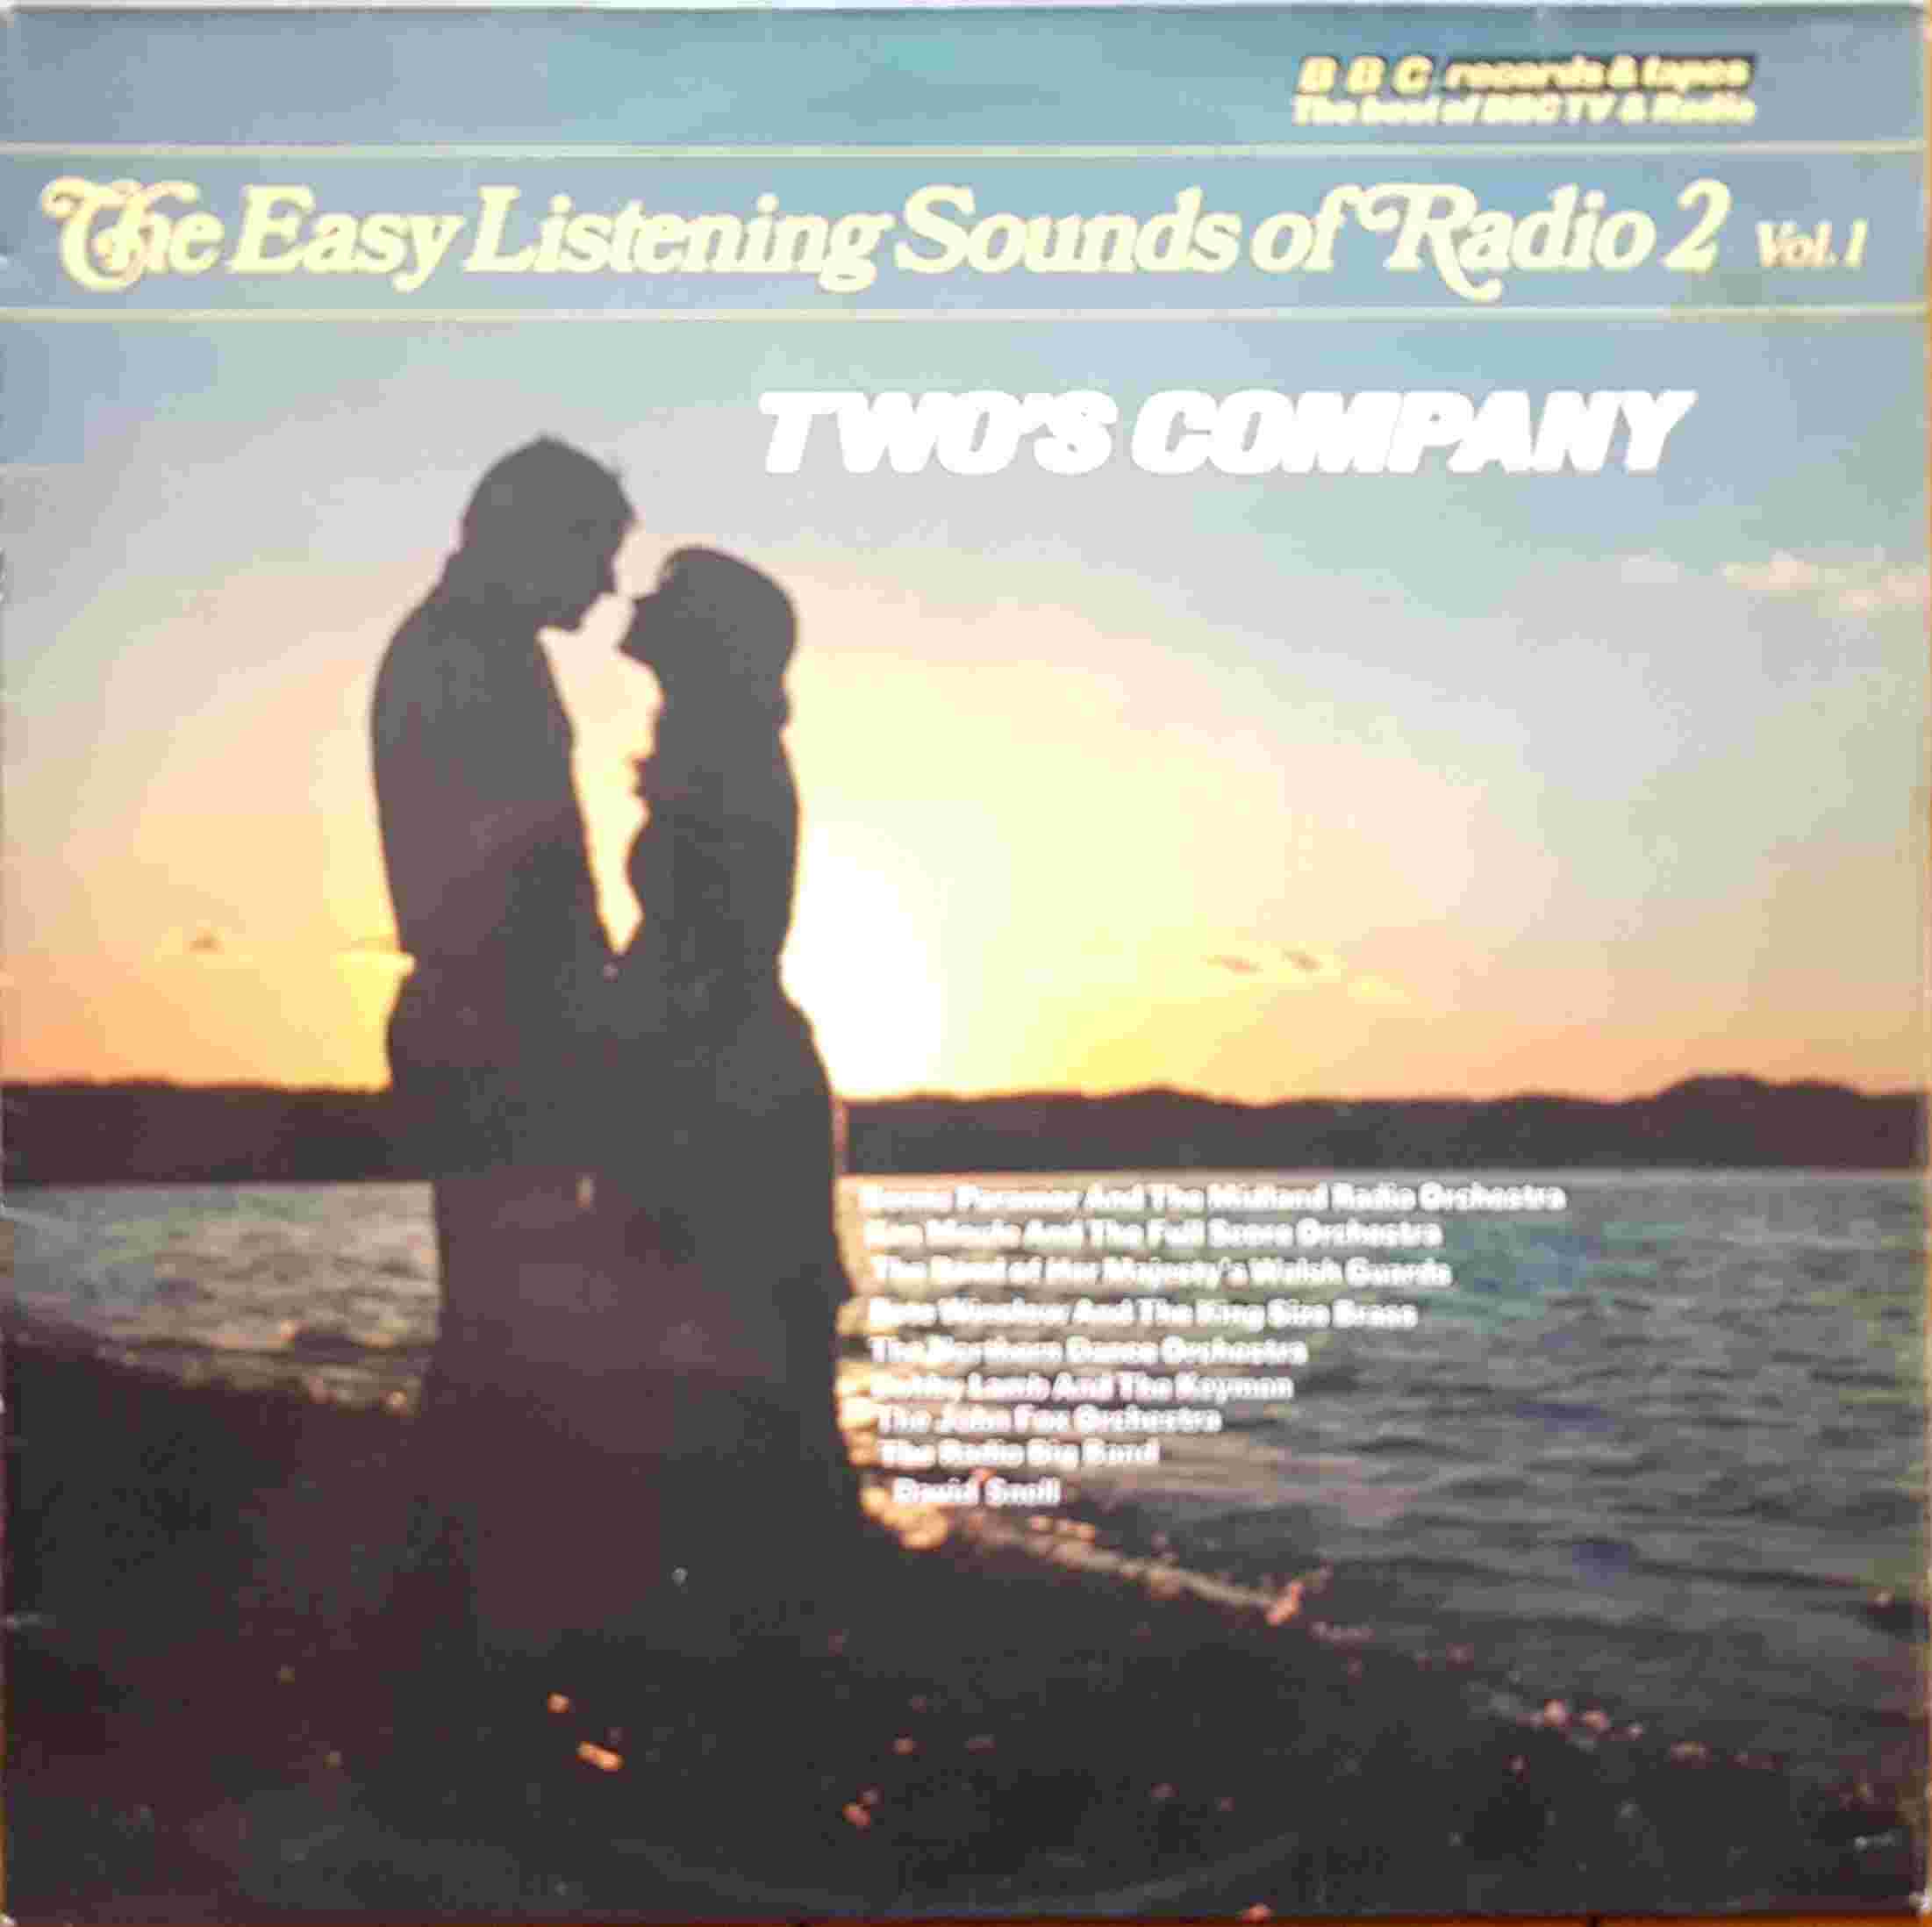 Picture of REC 200 The easy listening sounds of Radio 2 - Volume 1: Two's company by artist Various from the BBC albums - Records and Tapes library